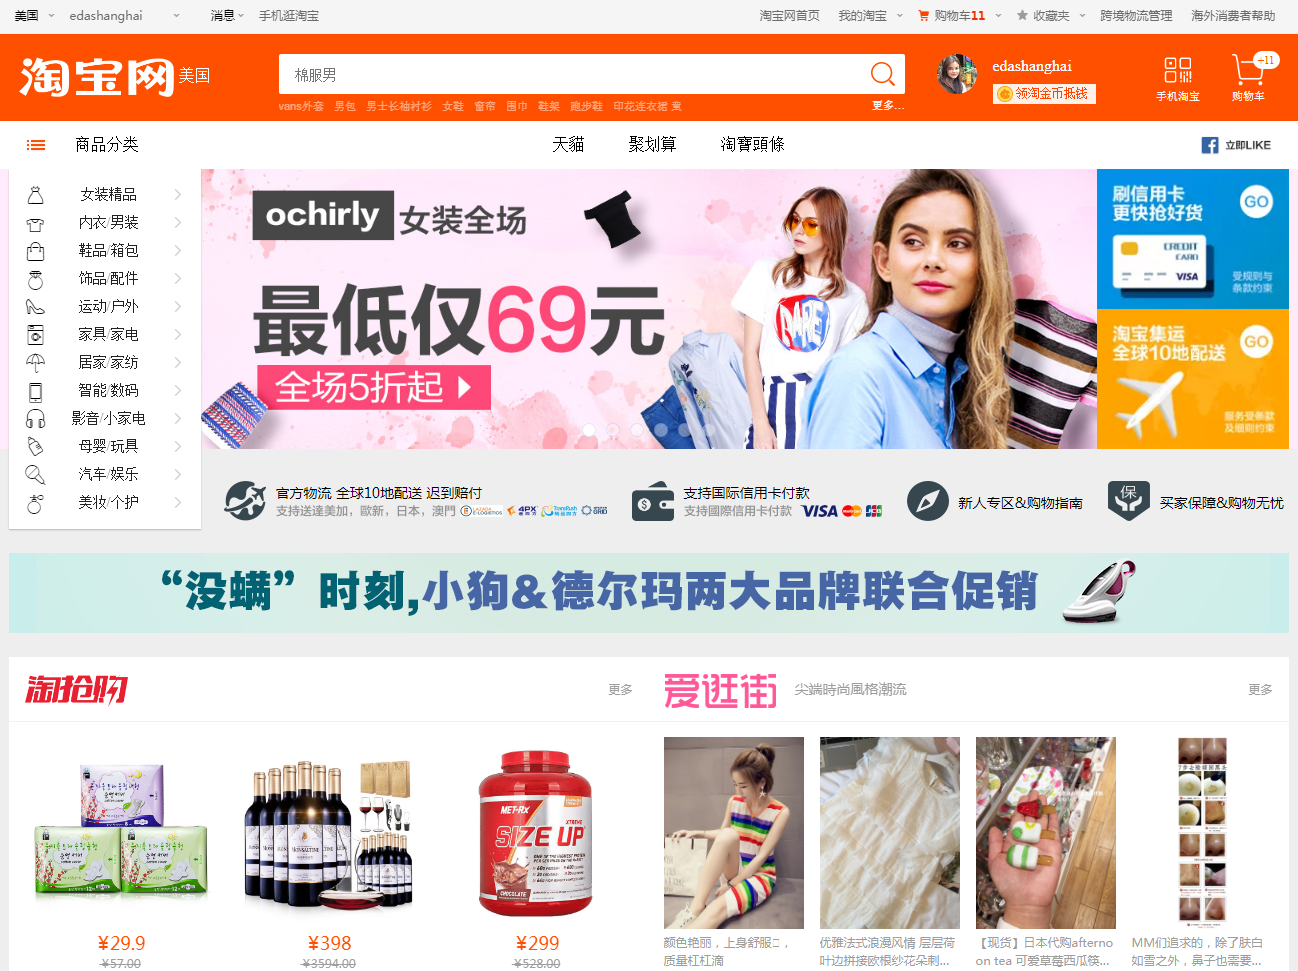 The success of Taobao on the Chinese Internet